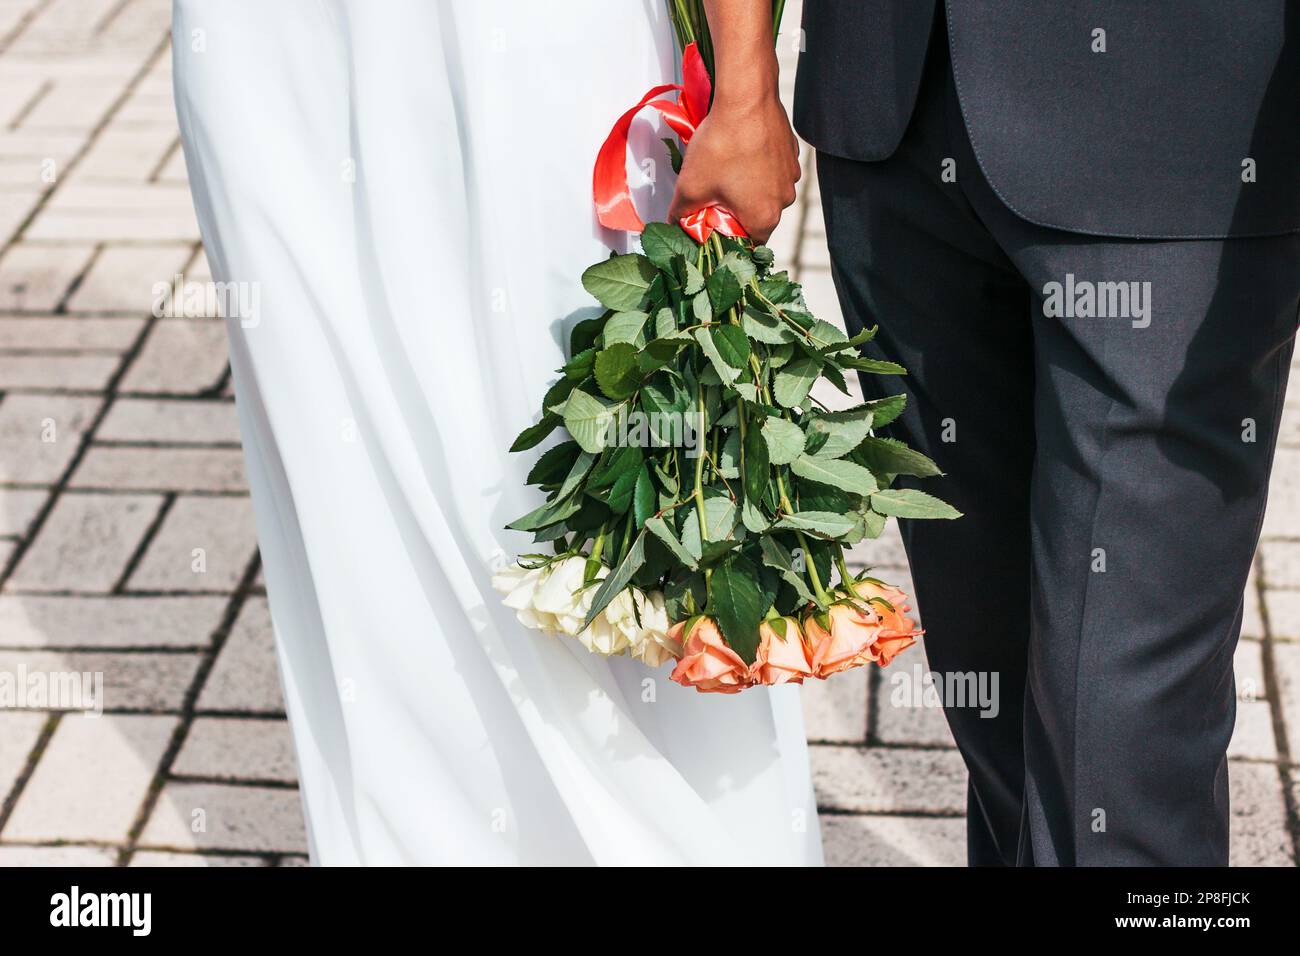 Bridal bouquet, a beautiful arrangement of flowers that complements the bride's outfit. Soft colors. Bride and groom in a magical moment. Stock Photo